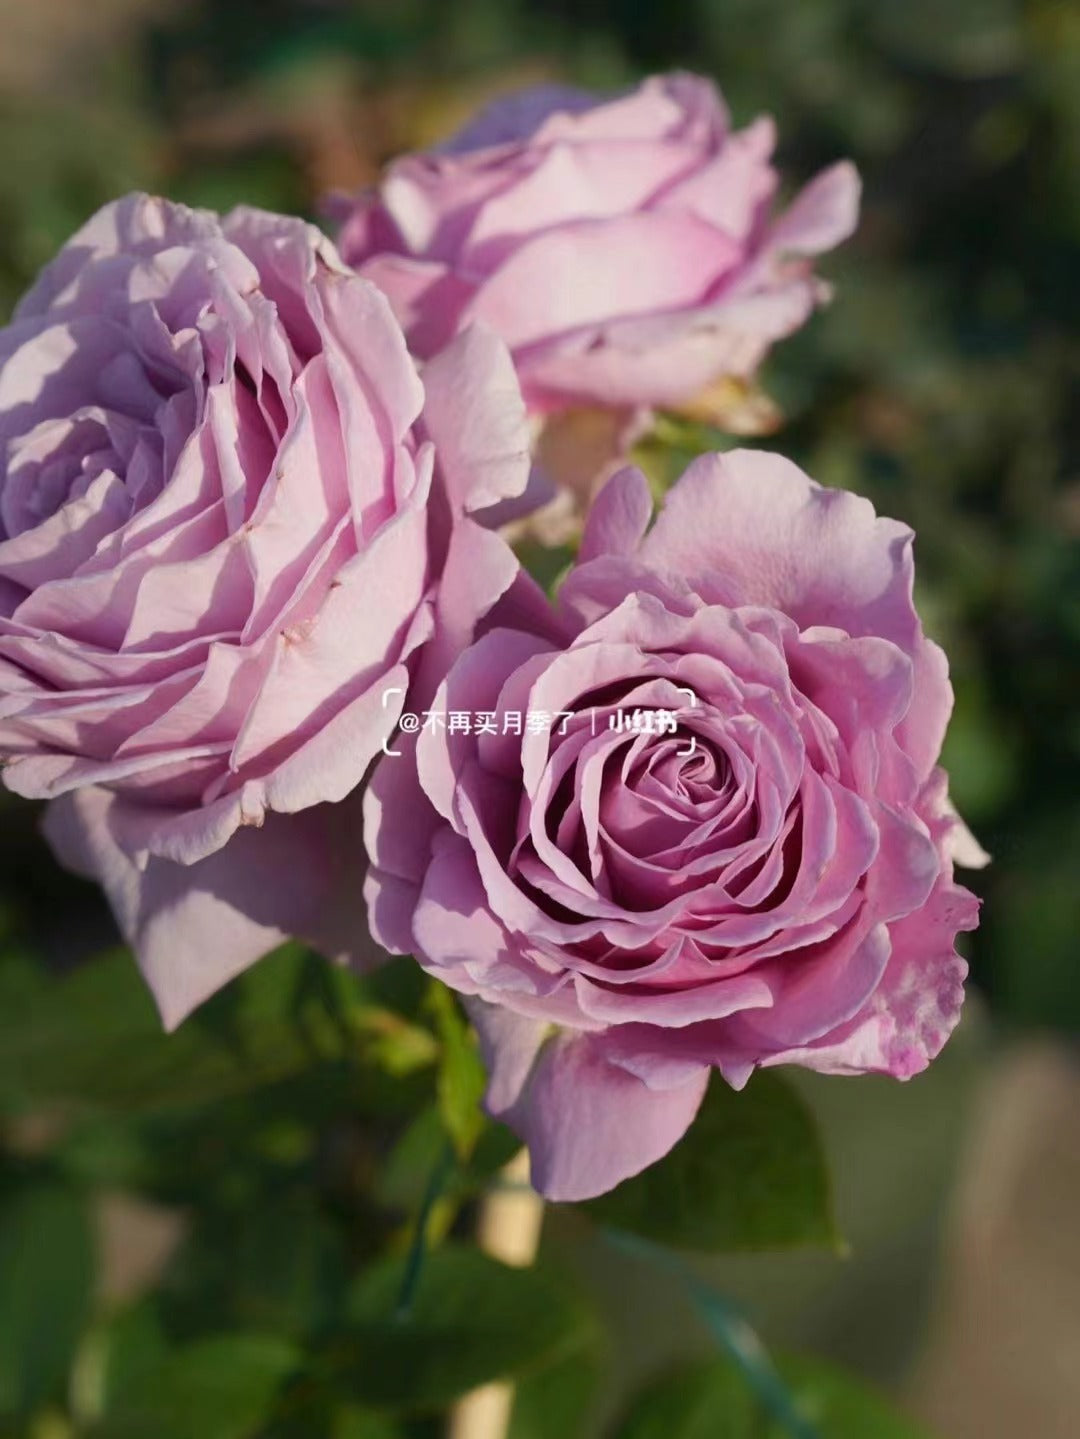 Rose｛Luxury Nove| ラグジュノーブ｝2 Gal+ Rare OwnRoot｜Netherlands Cutting Rose| 天然香水 | Strong Upright | Redolent| Bloom Repeatedly| Heat Toleran